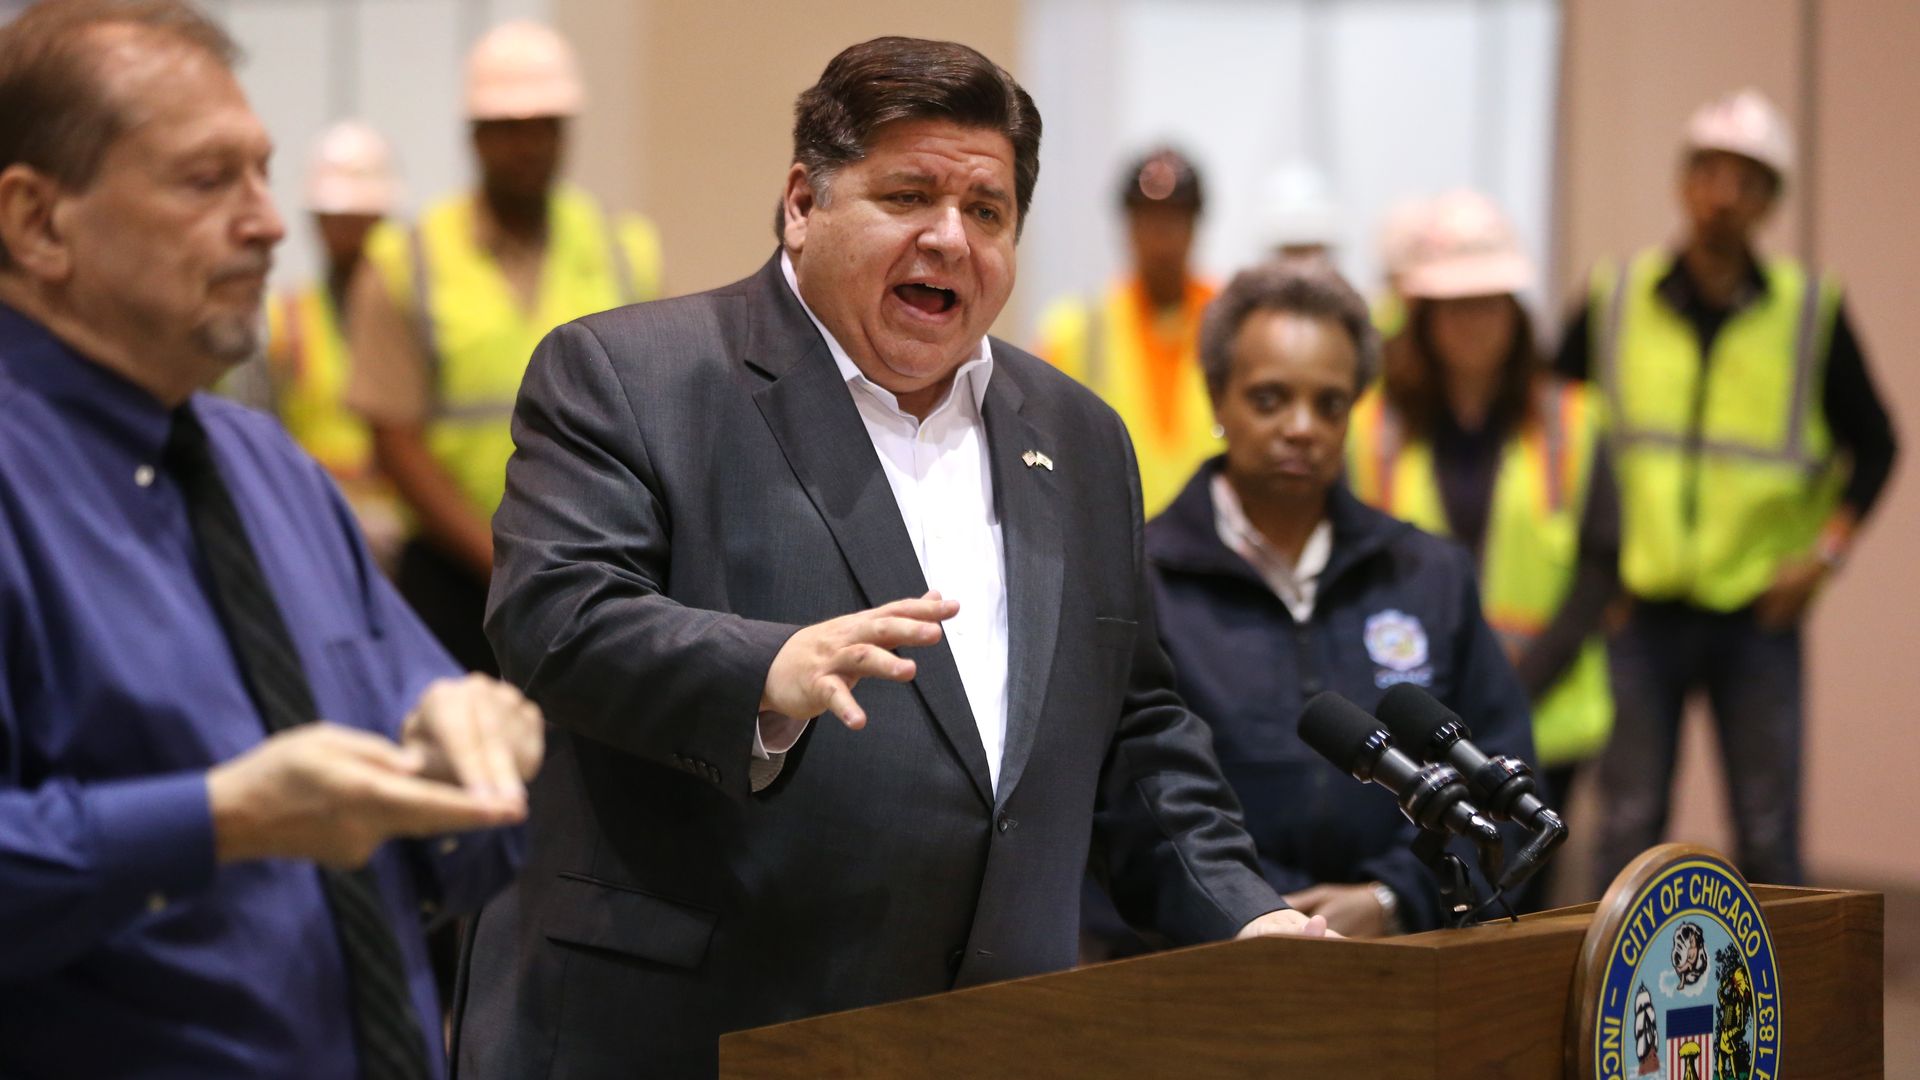  Illinois Gov. J.B. Pritzker speaks during a press conference in Hall C Unit 1 of the COVID-19 alternate site at McCormick Place on Friday, April 3, 2020 in Chicago, Illinois.